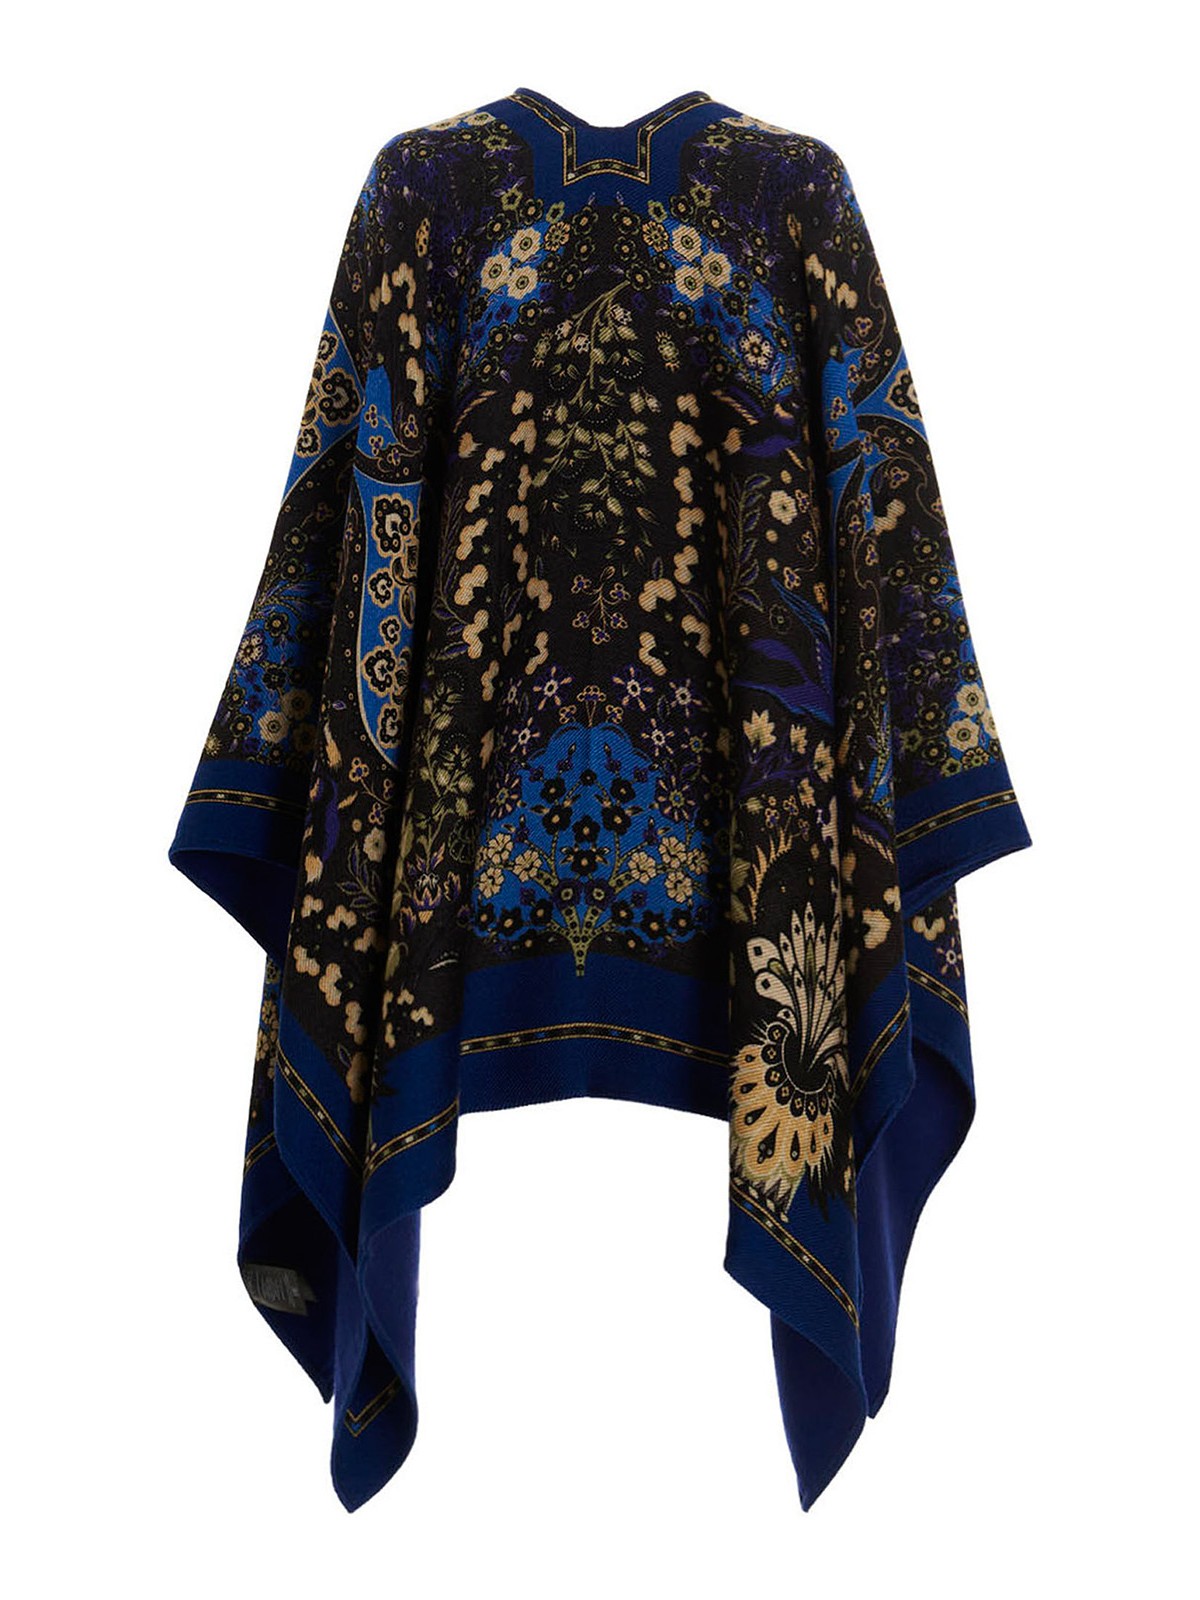 Capes & Ponchos Etro - Printed cape - 171179519001 | Shop online at iKRIX